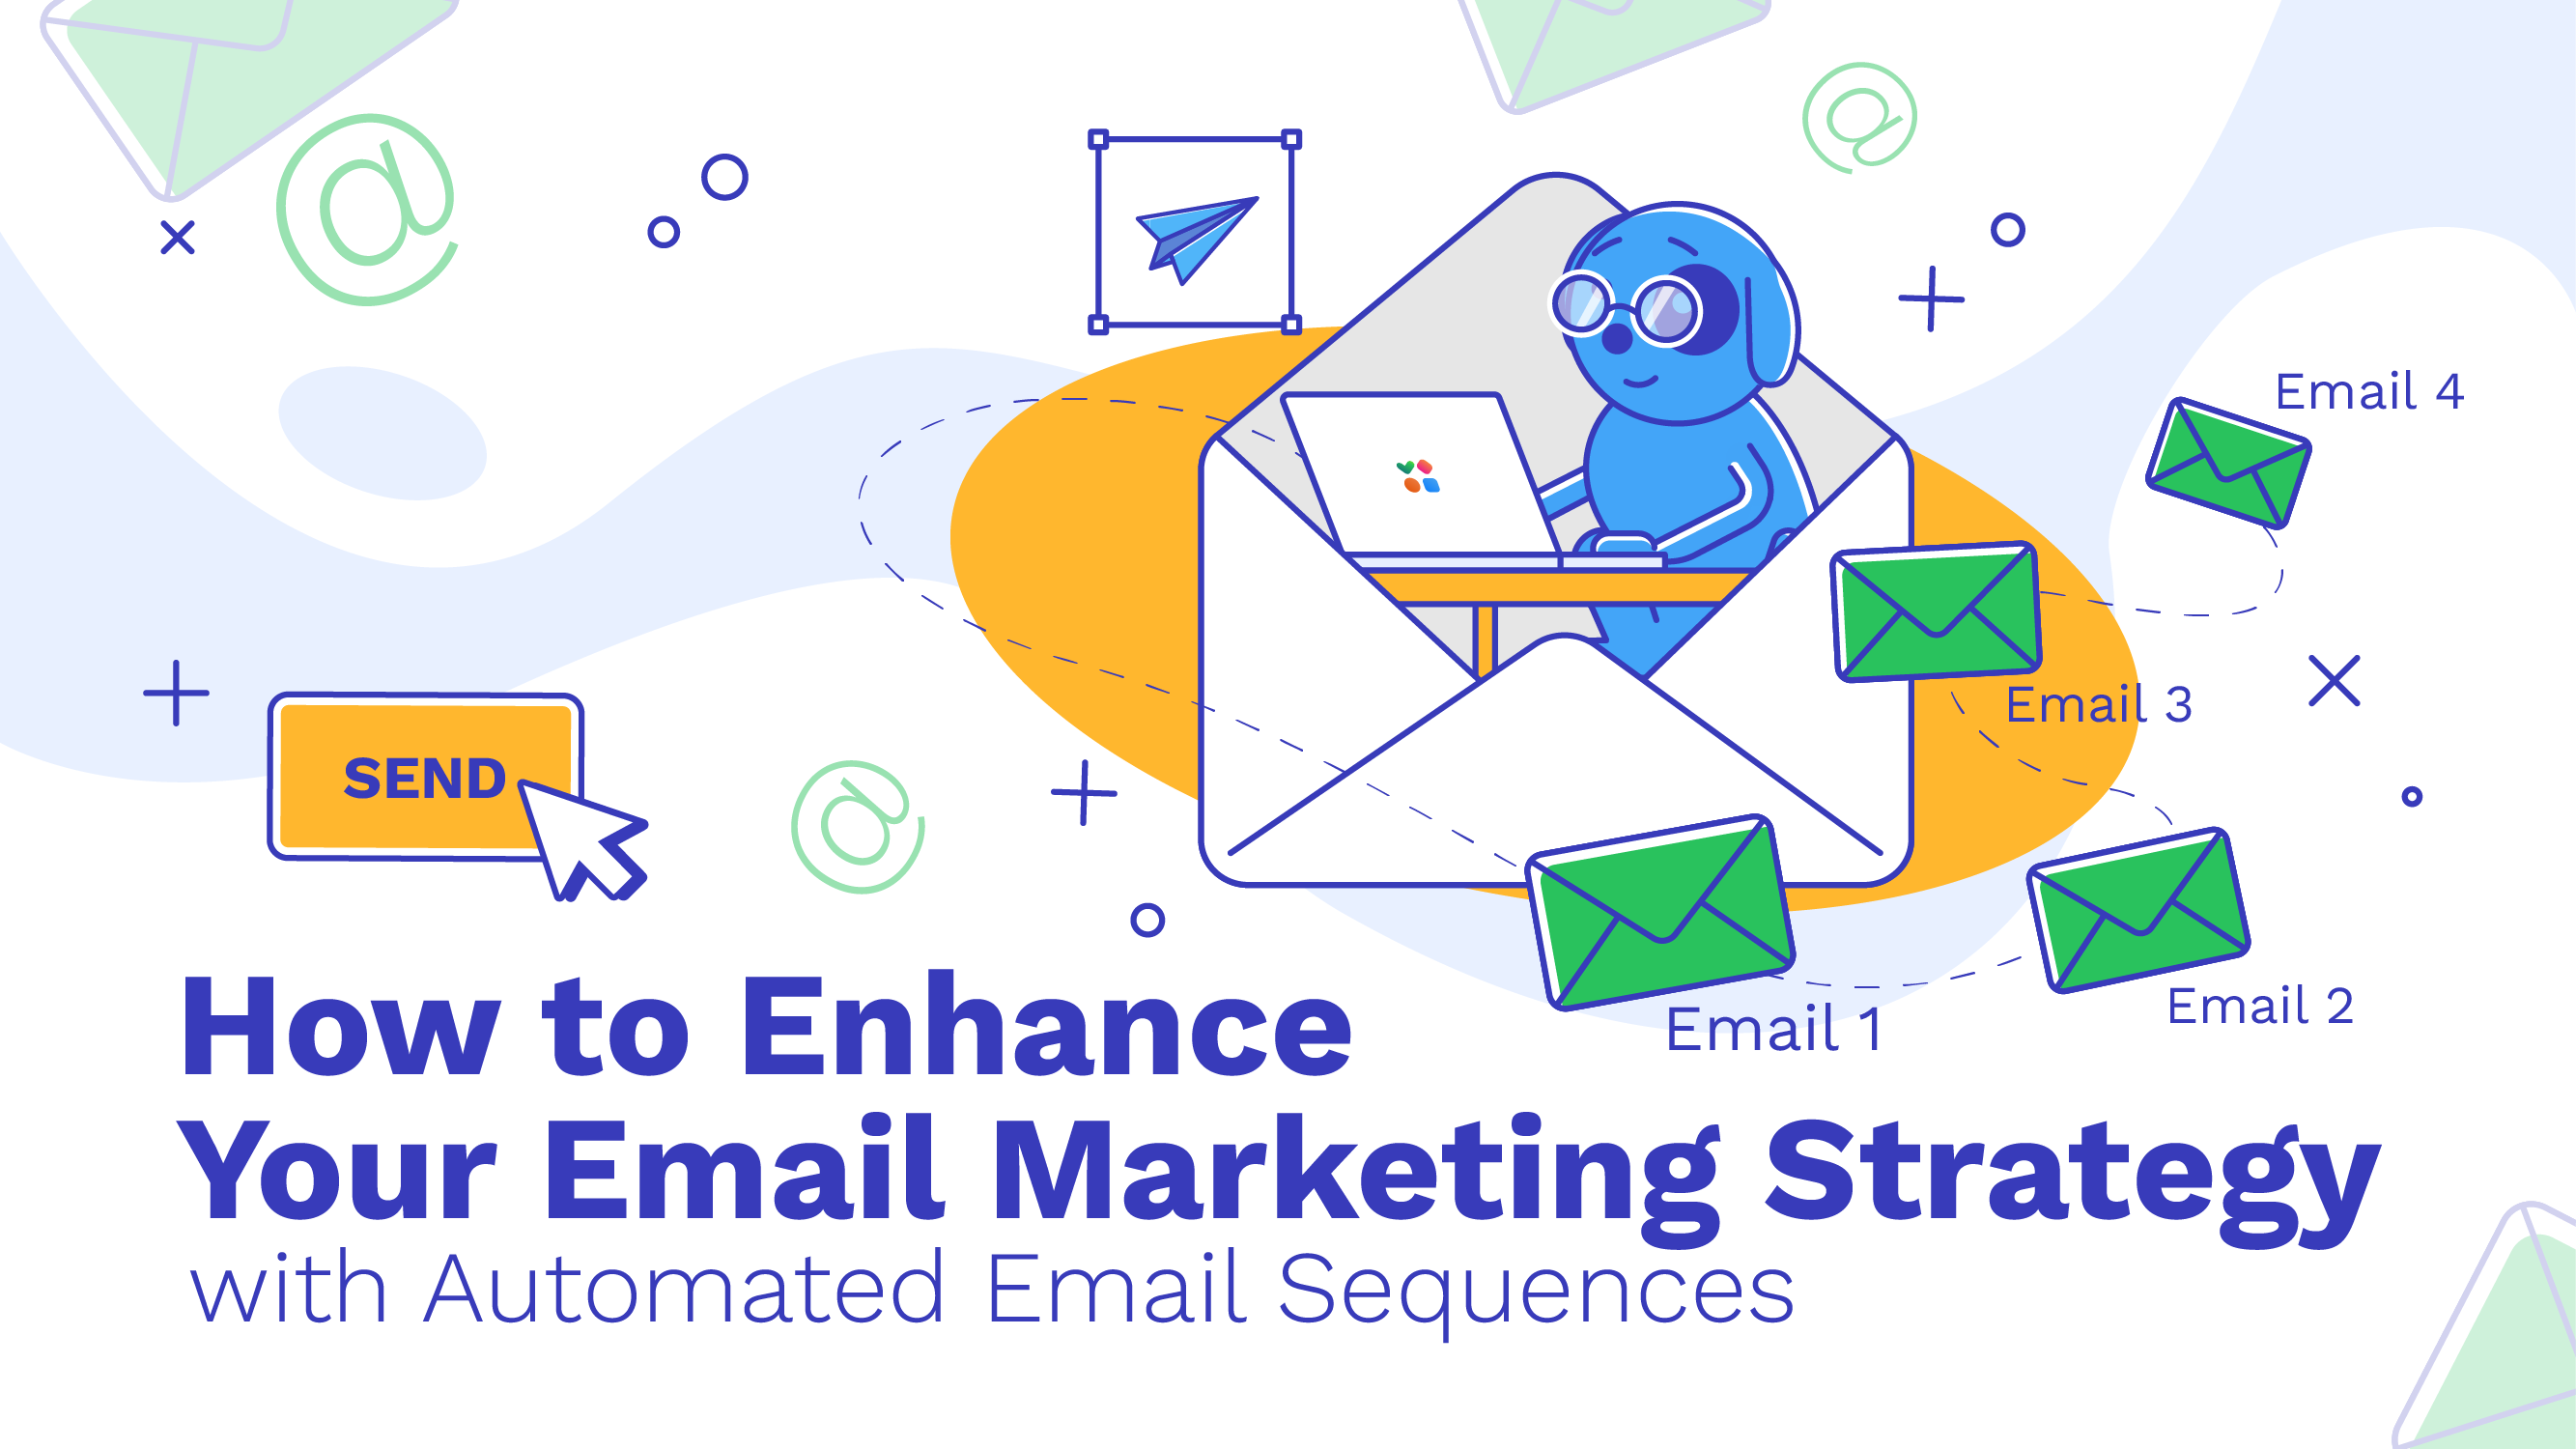 How to Enhance Your Email Marketing Strategy with Automated Email Sequences